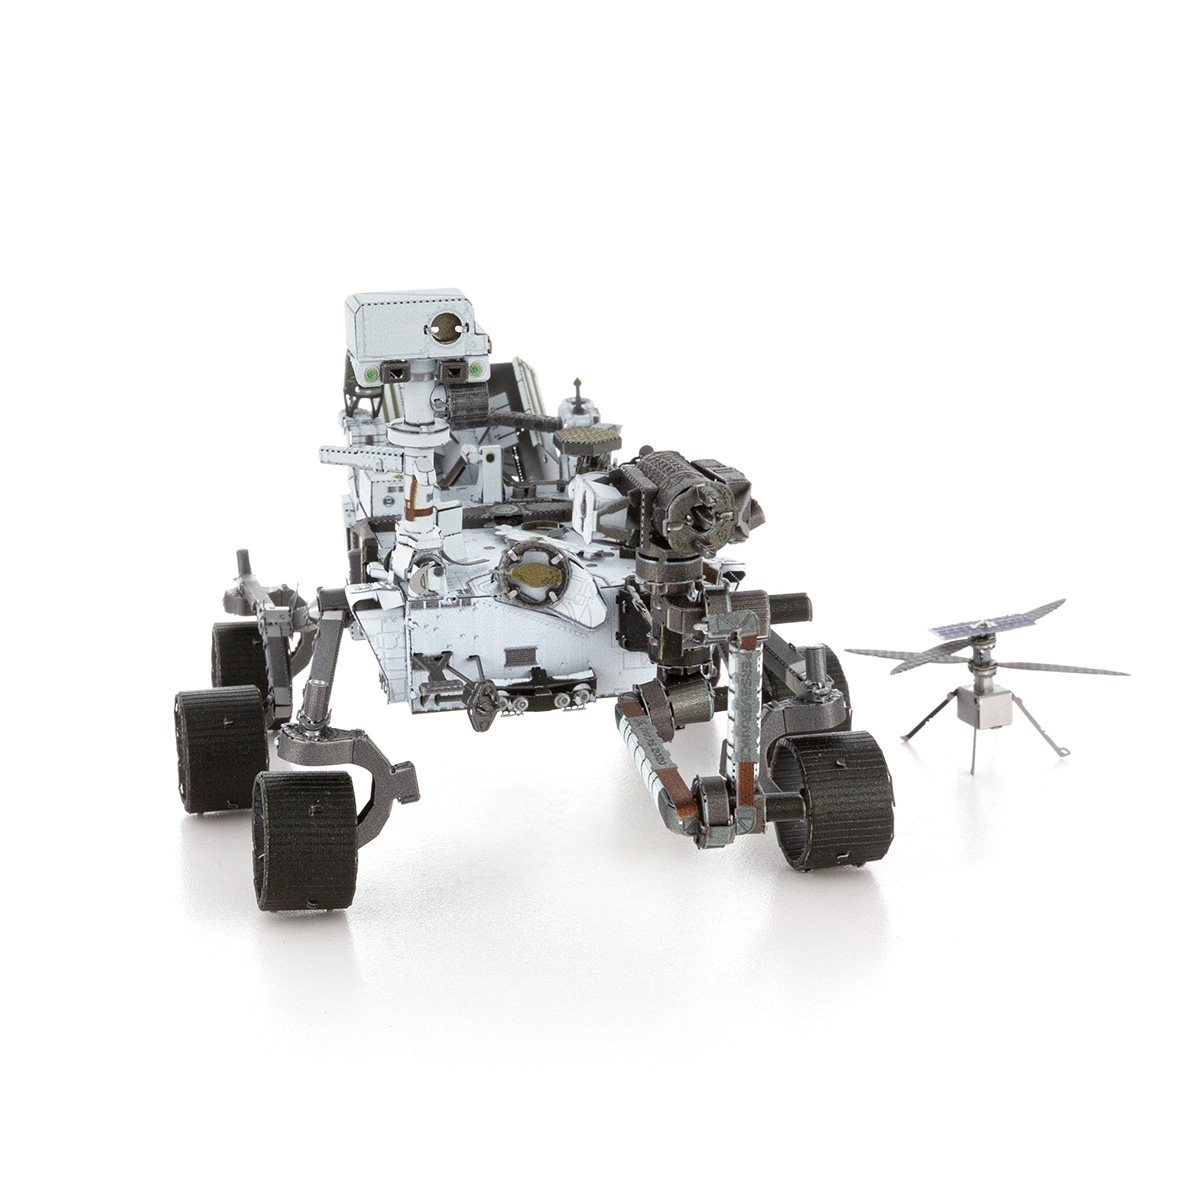 Mars Rover Perseverance & Ingenuity Helicopter by Metal Earth